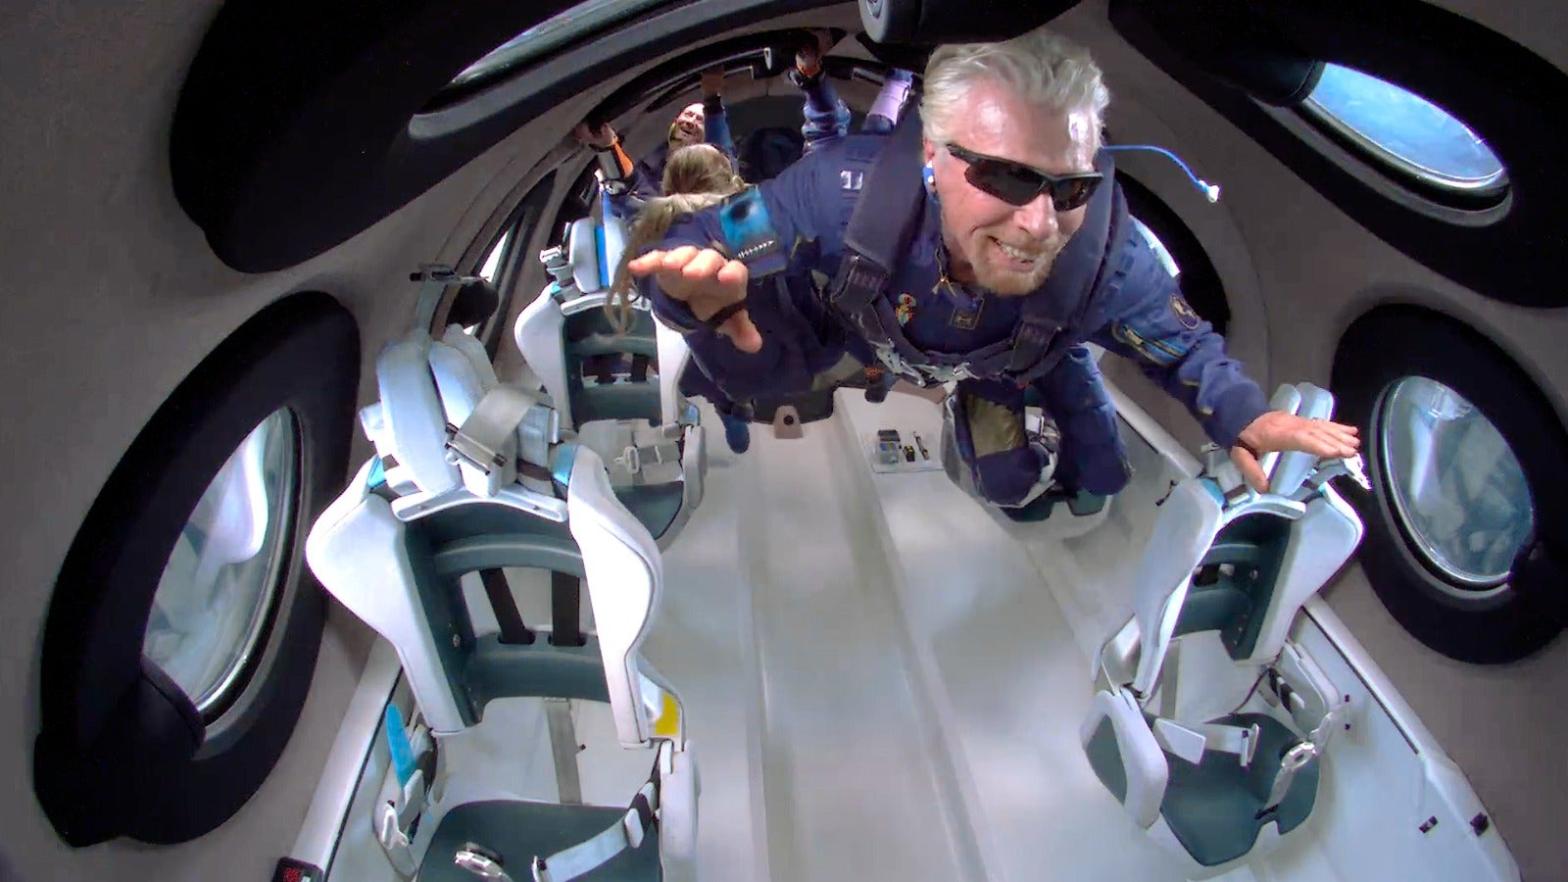 Richard Branson during the Unity 22 mission to space on July 11, 2021. (Image: Virgin Galactic)